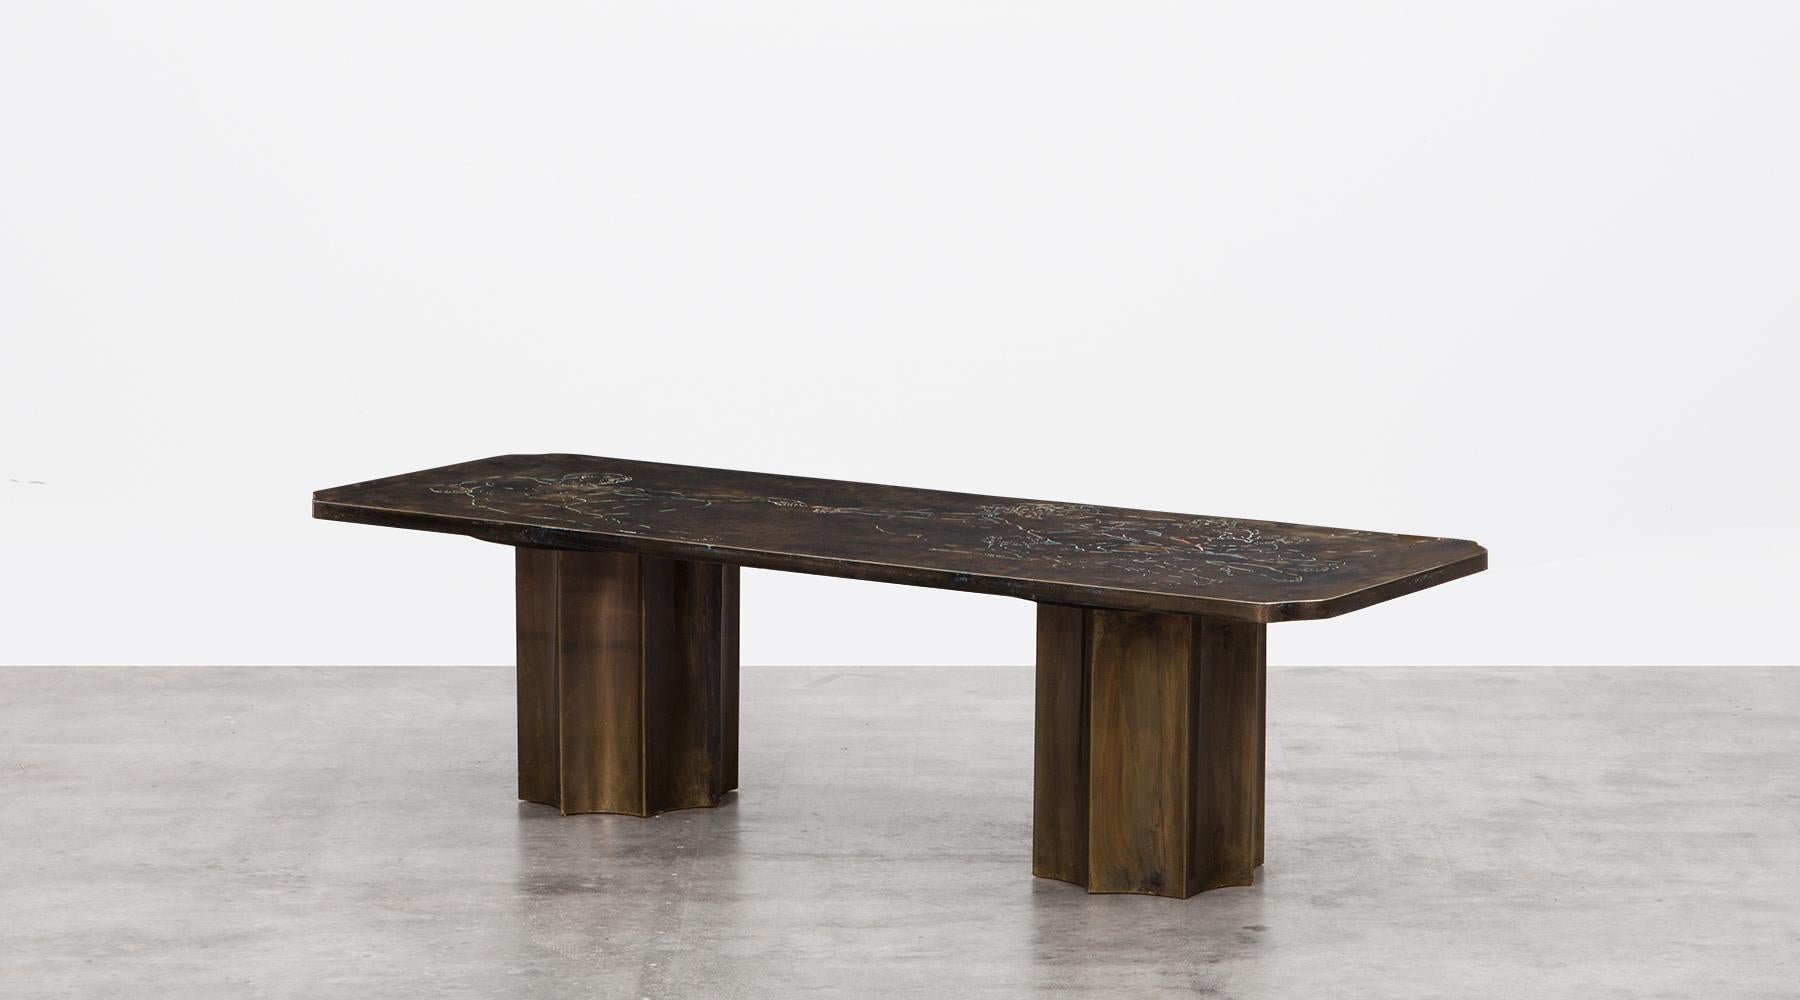 Very rare and unique coffee table designed by Philip and Kelvin LaVerne. The bronze table stands on two arched pedestals, the beautiful patterned etched surface shows the motifs of the famous Italian painter Michelangelo - the creation of Adam. The